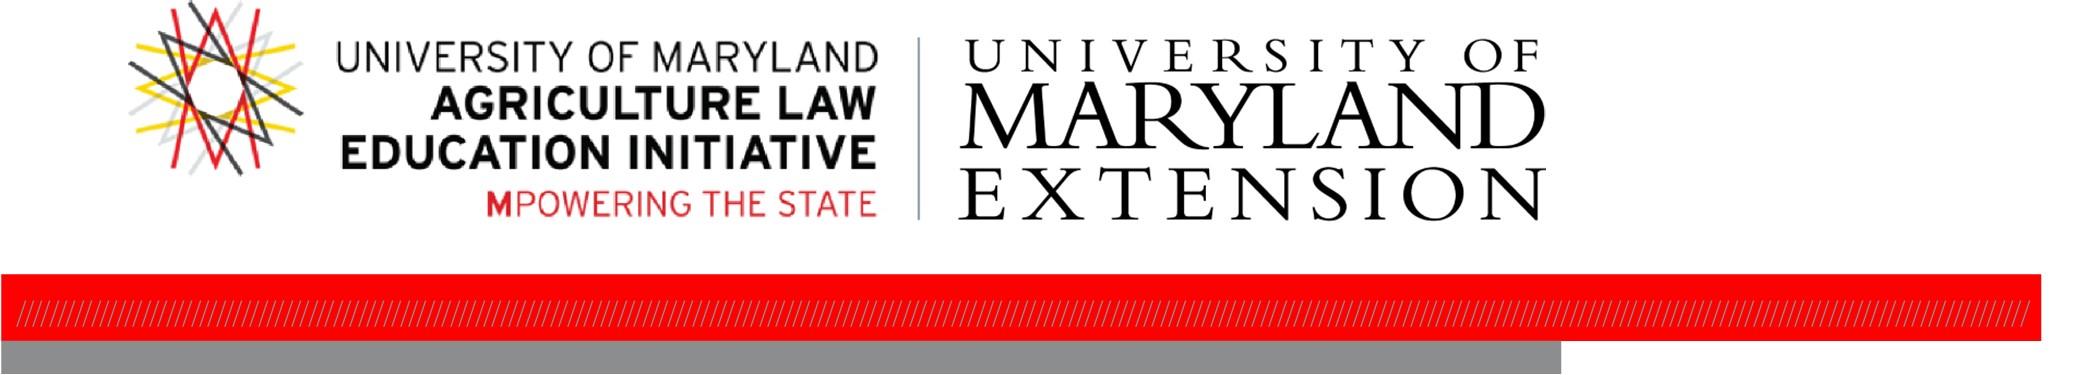 Publication header containing Agriculture Law Education Initiative and the University of Maryland Extension logos.